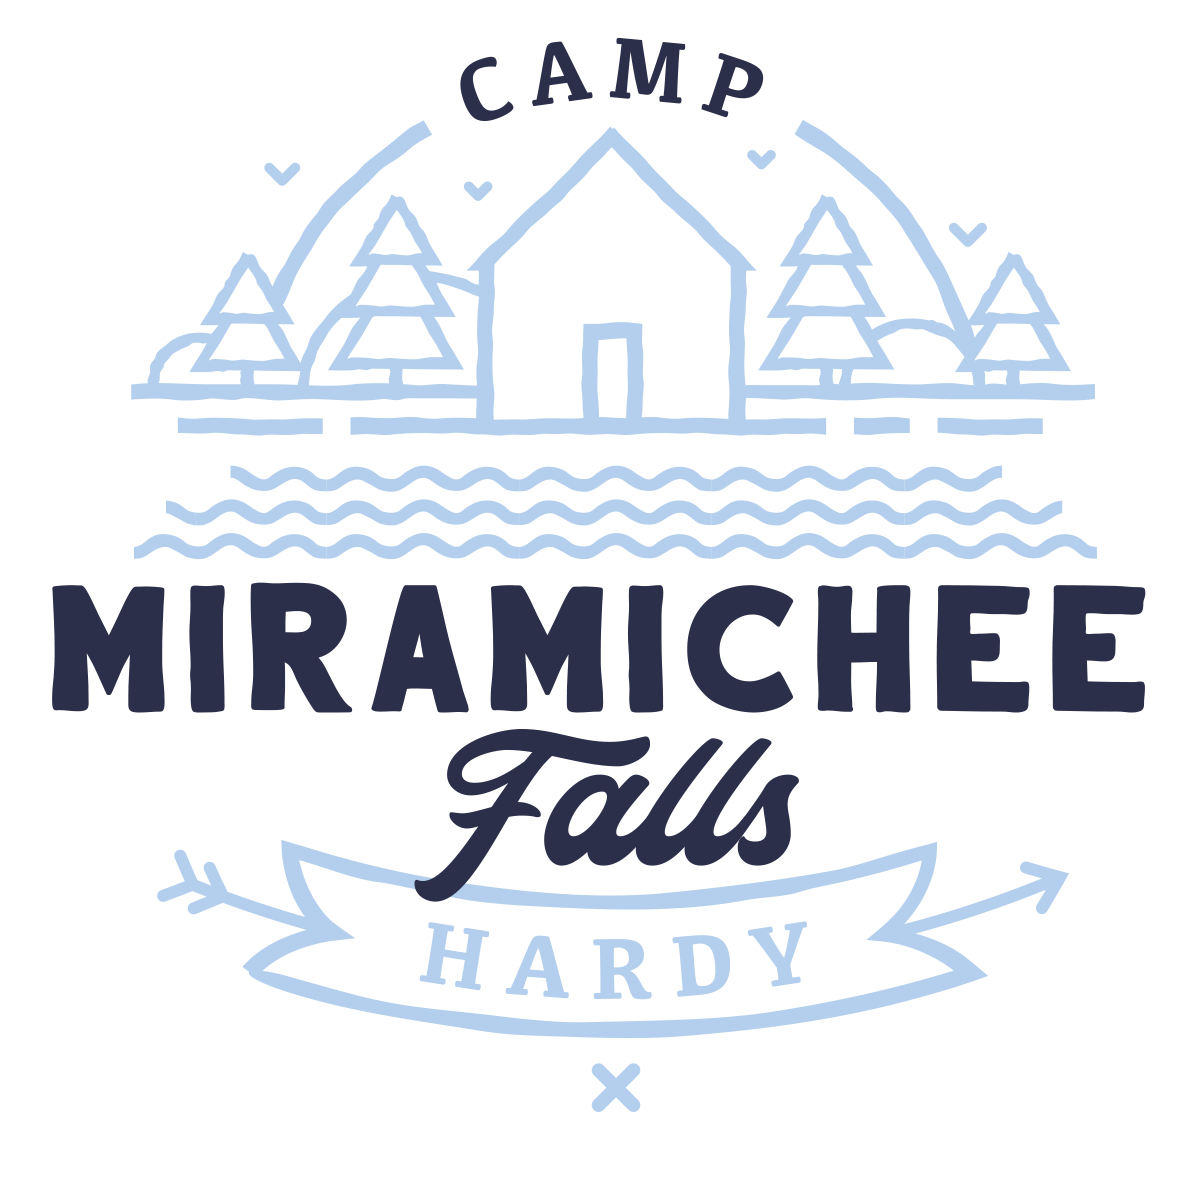 Camp Miramichee Falls - Cabins in the line of totality